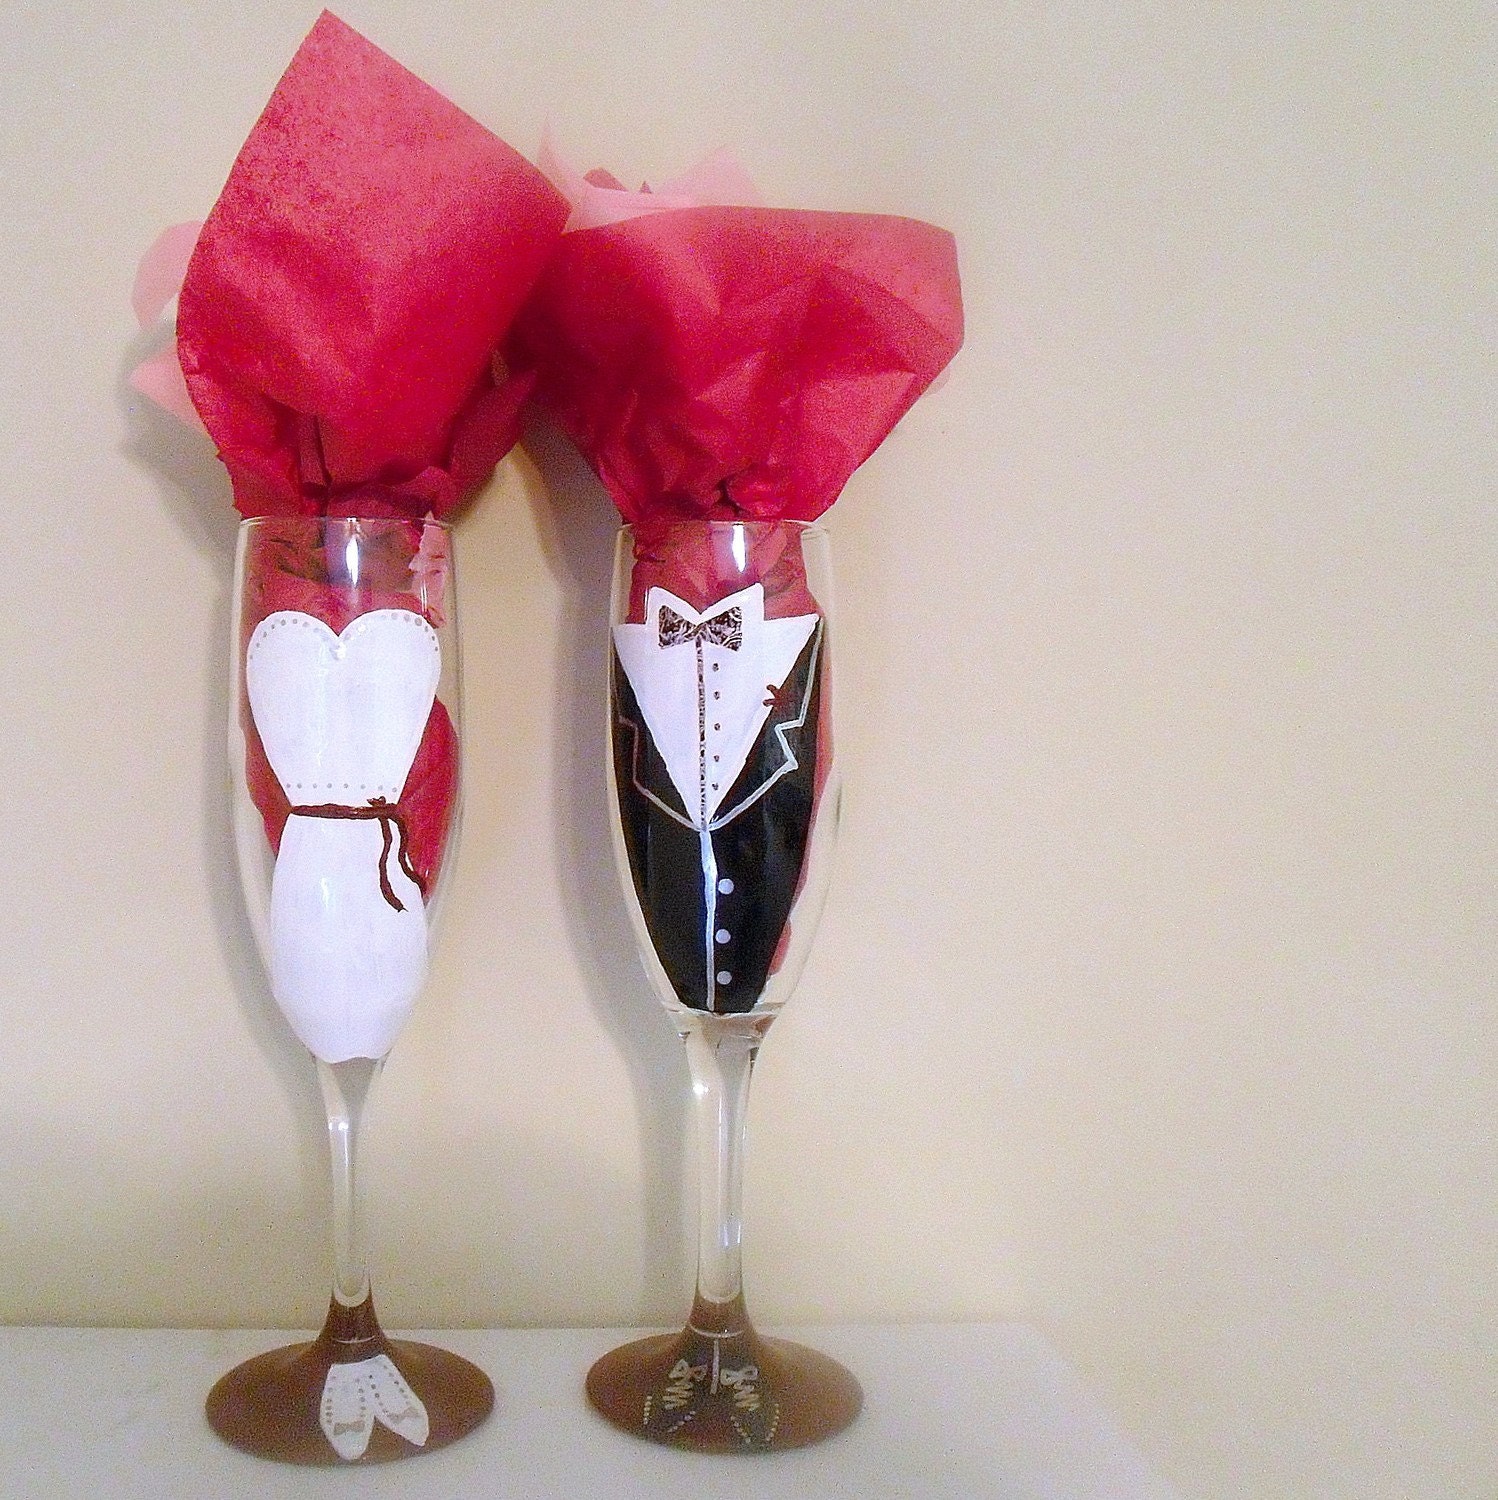 Glasses are painted with traditional wedding gear a white gown and tuxedo